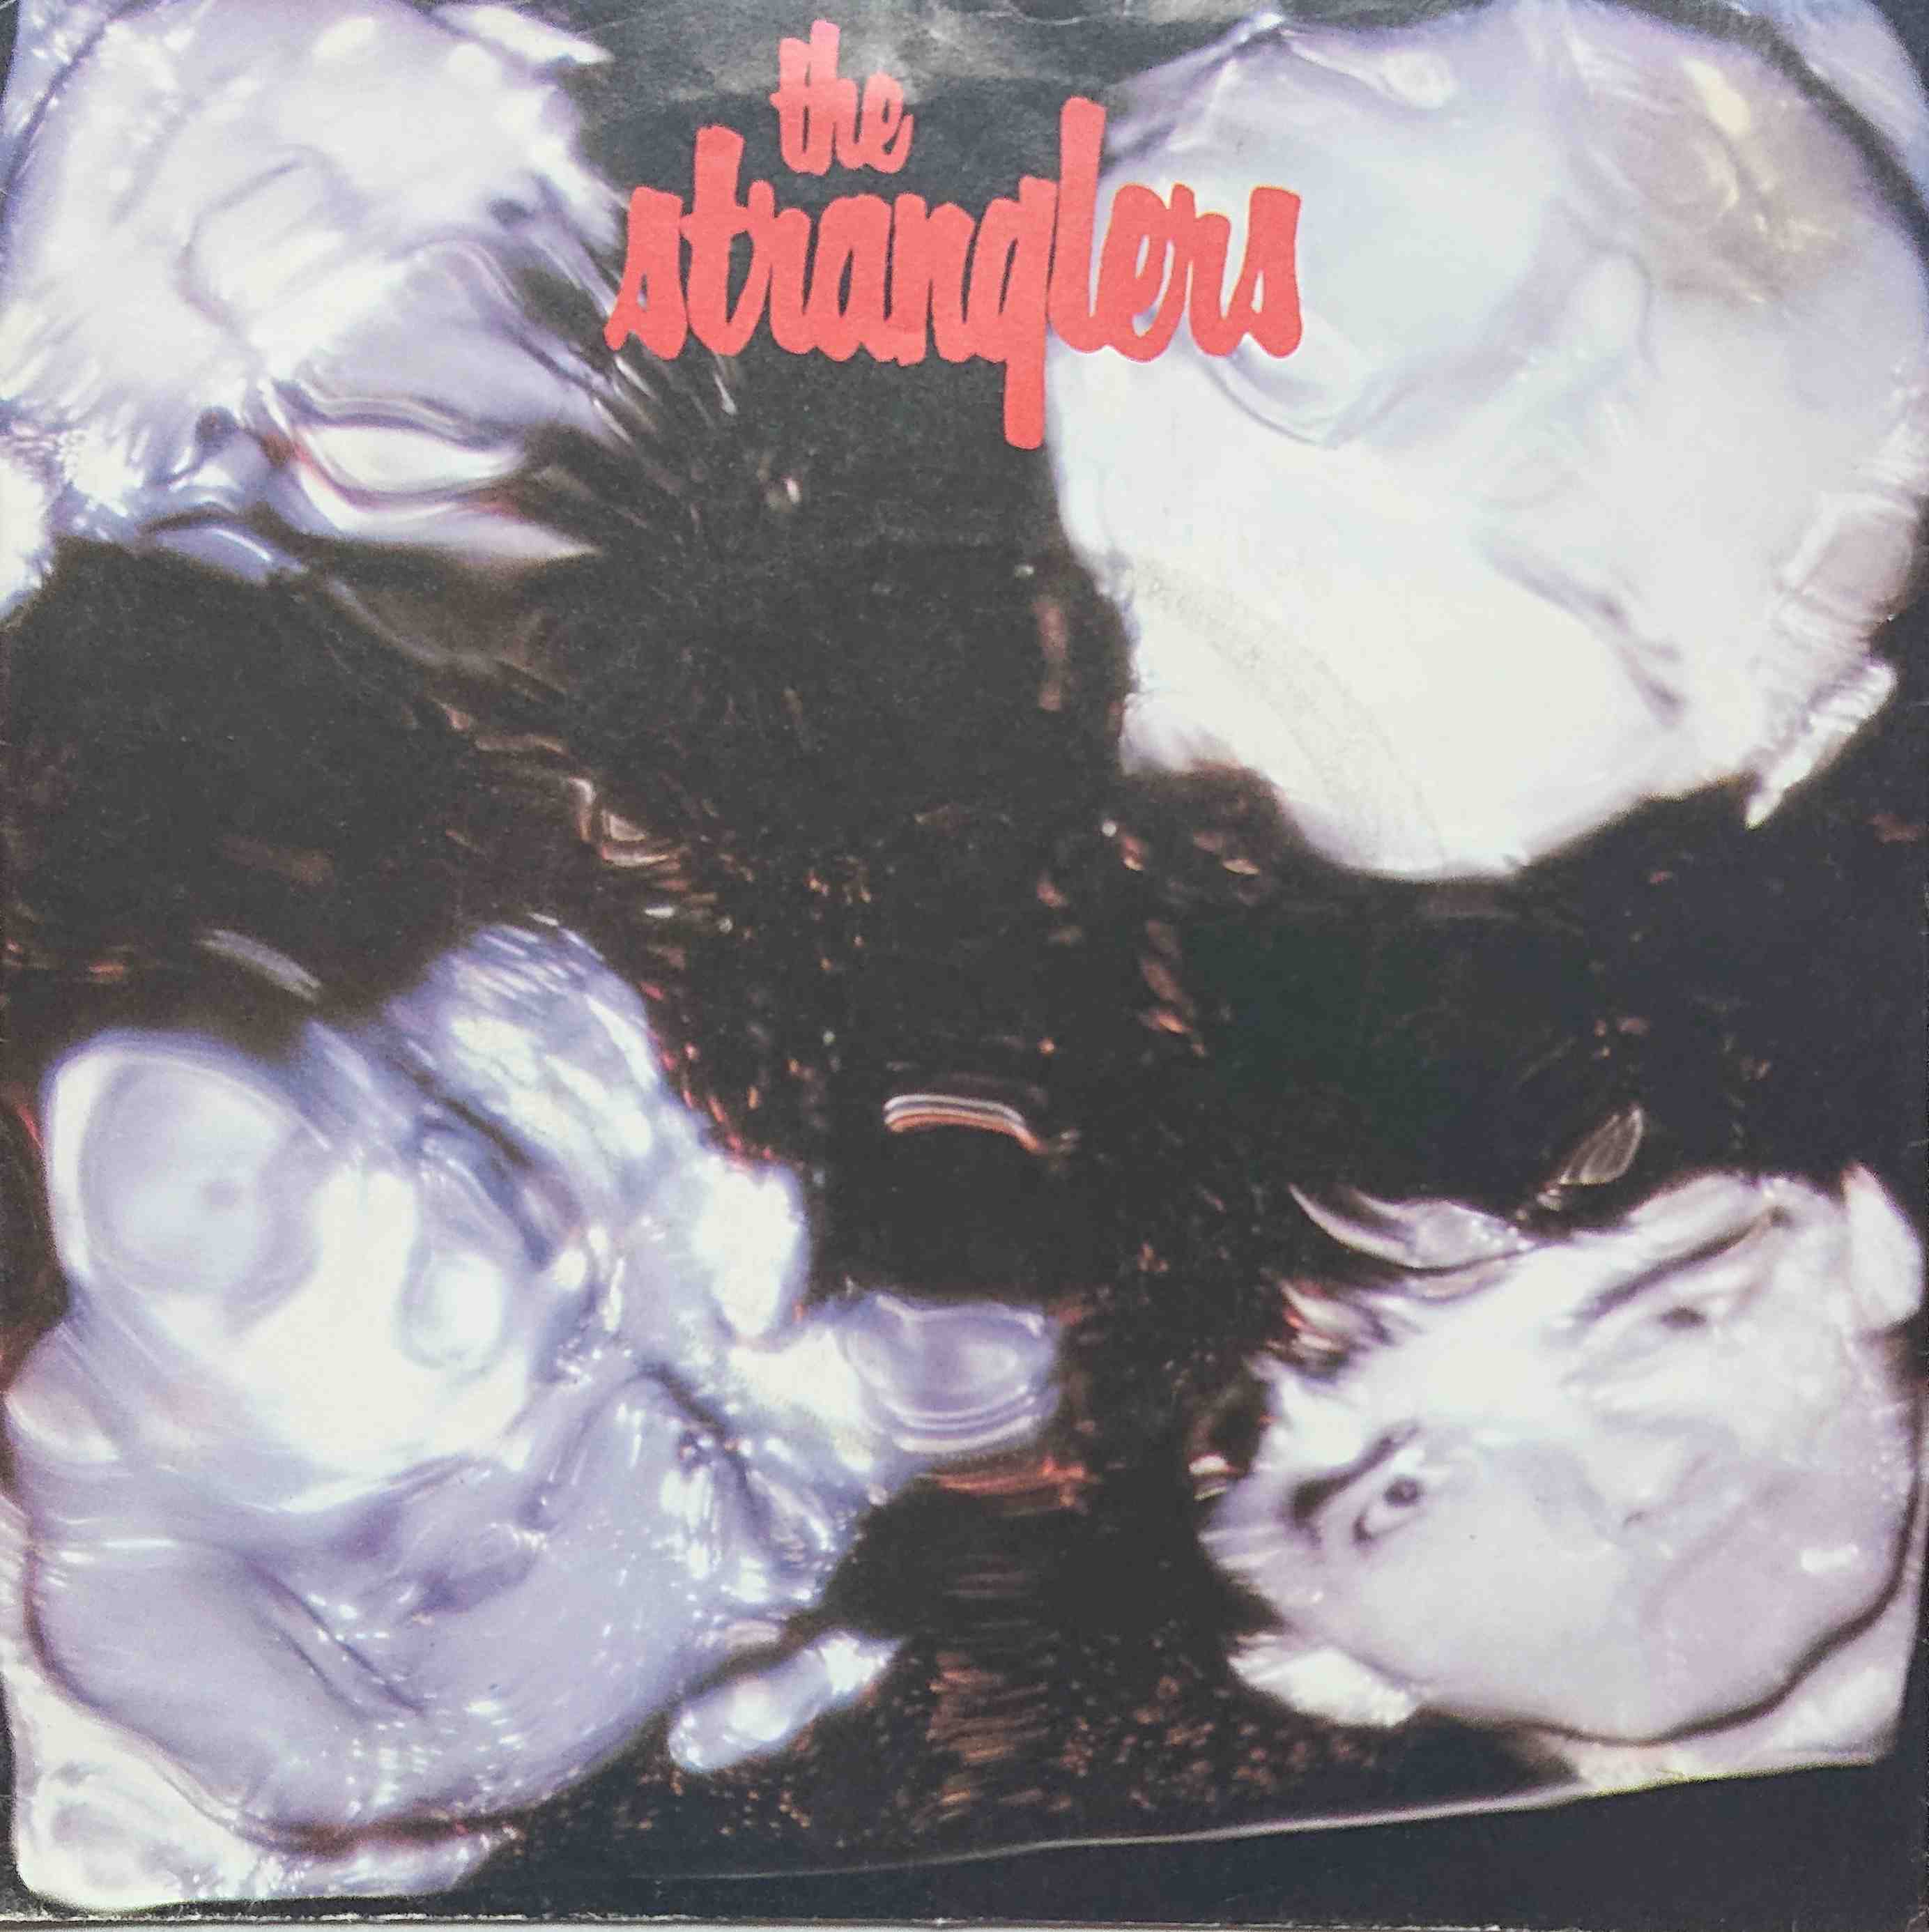 Picture of La folie by artist The Stranglers  from The Stranglers singles